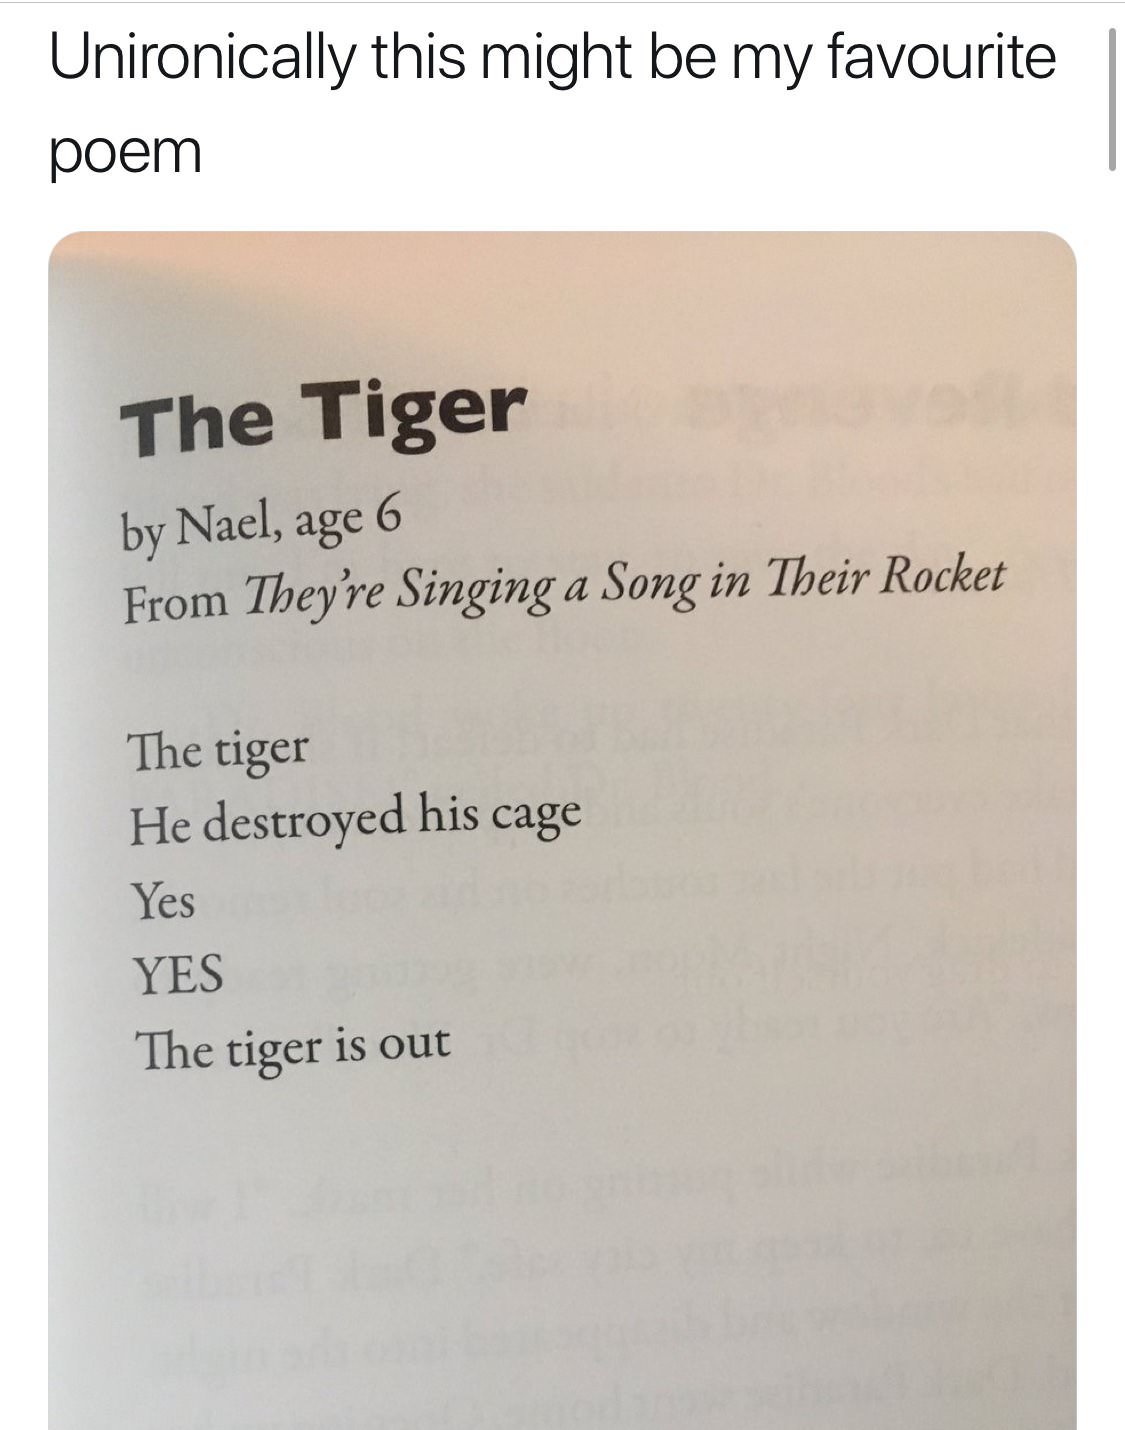 message - Unironically this might be my favourite poem The Tiger by Nael, age 6 From They're Singing a Song in Their Rocket The tiger He destroyed his cage Yes Yes The tiger is out